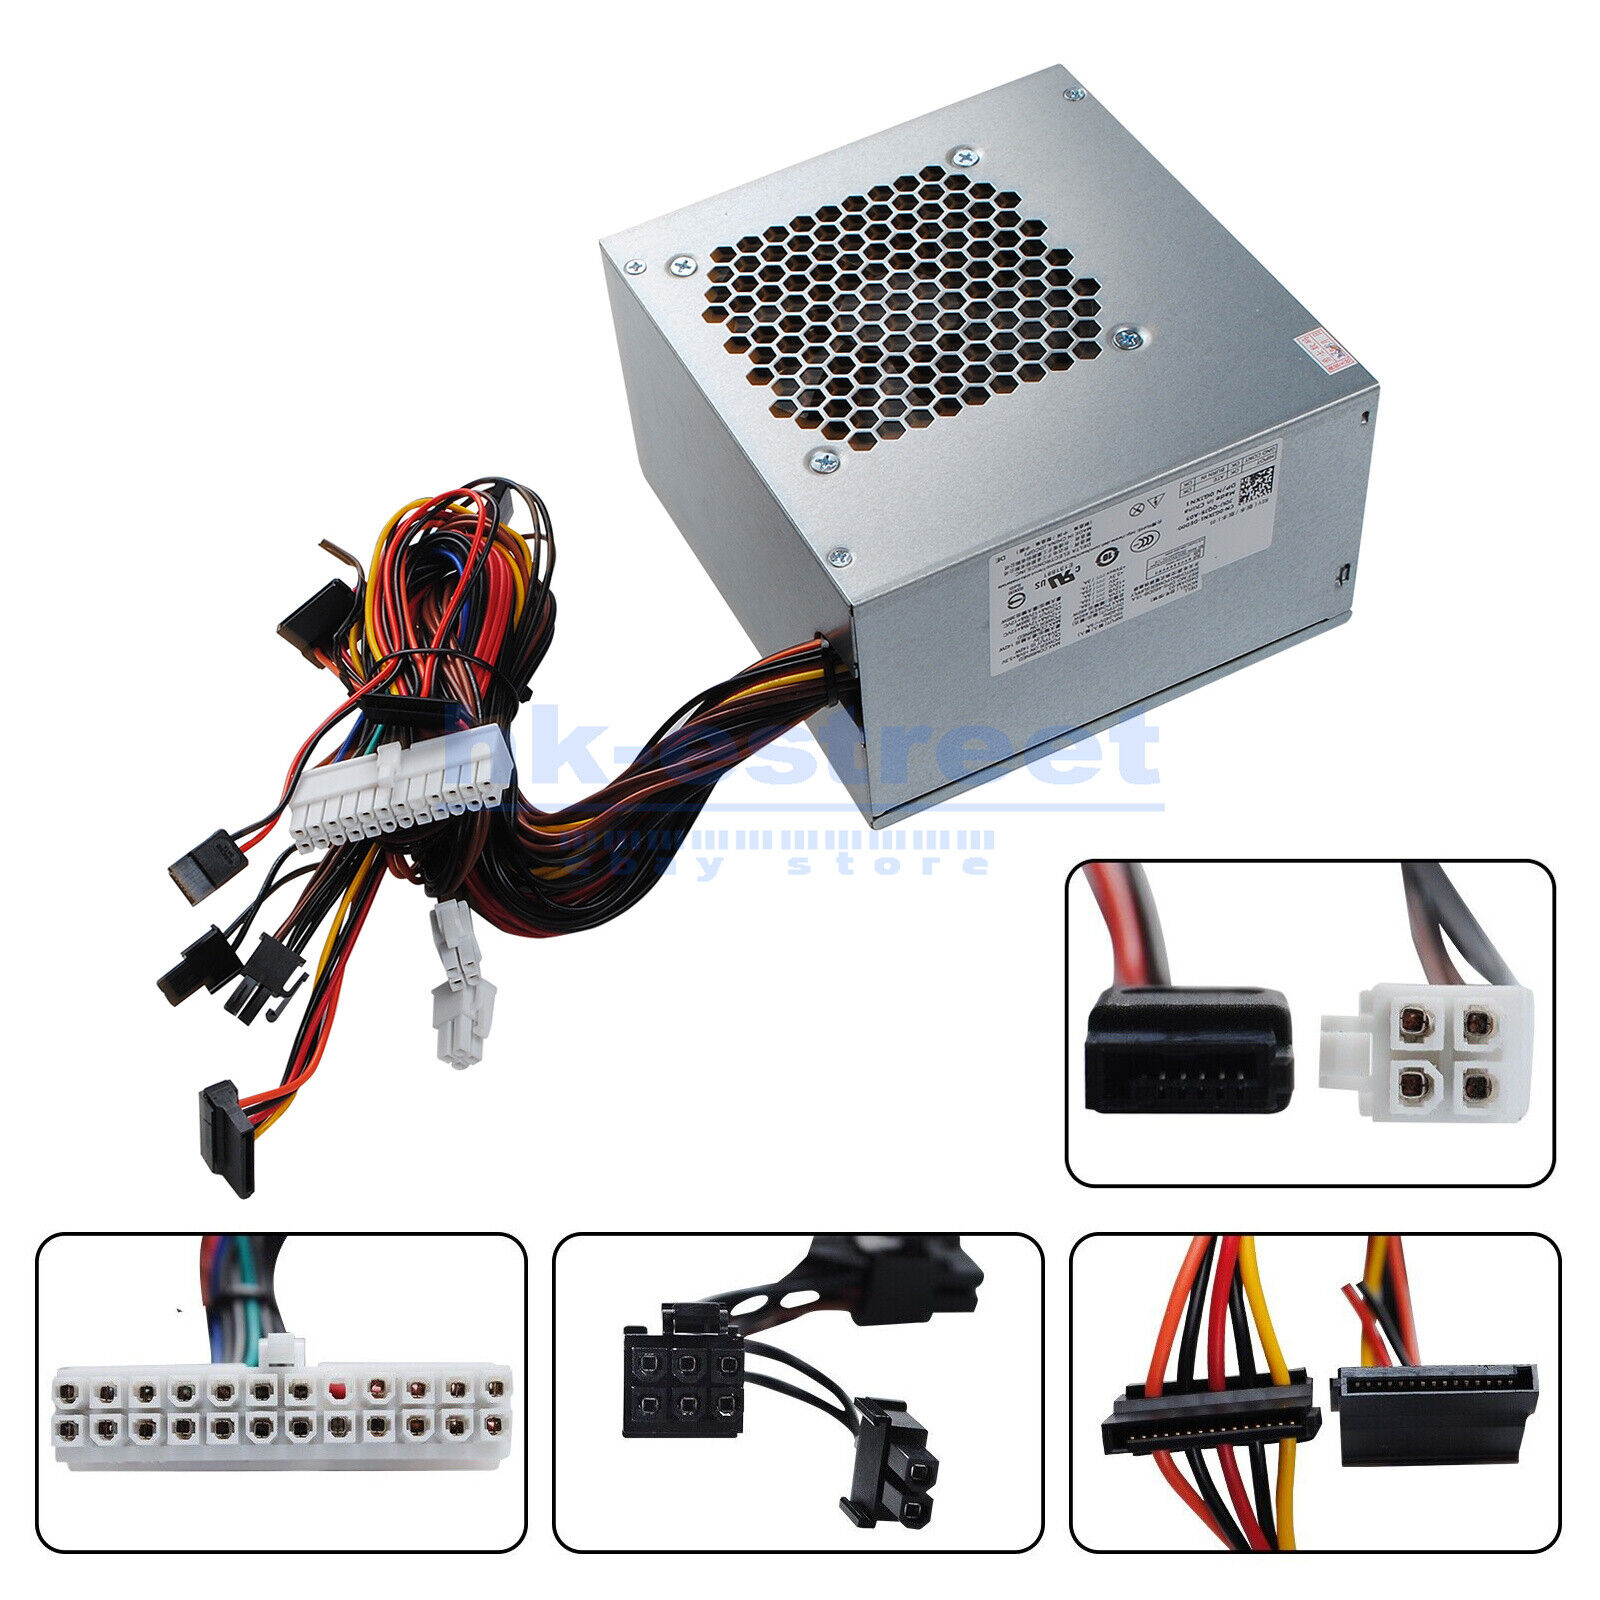 New 460W D460AM-03 GJXN1 PSU Power Supply For DELL XPS 8910 8920 8300 8900 R5 US